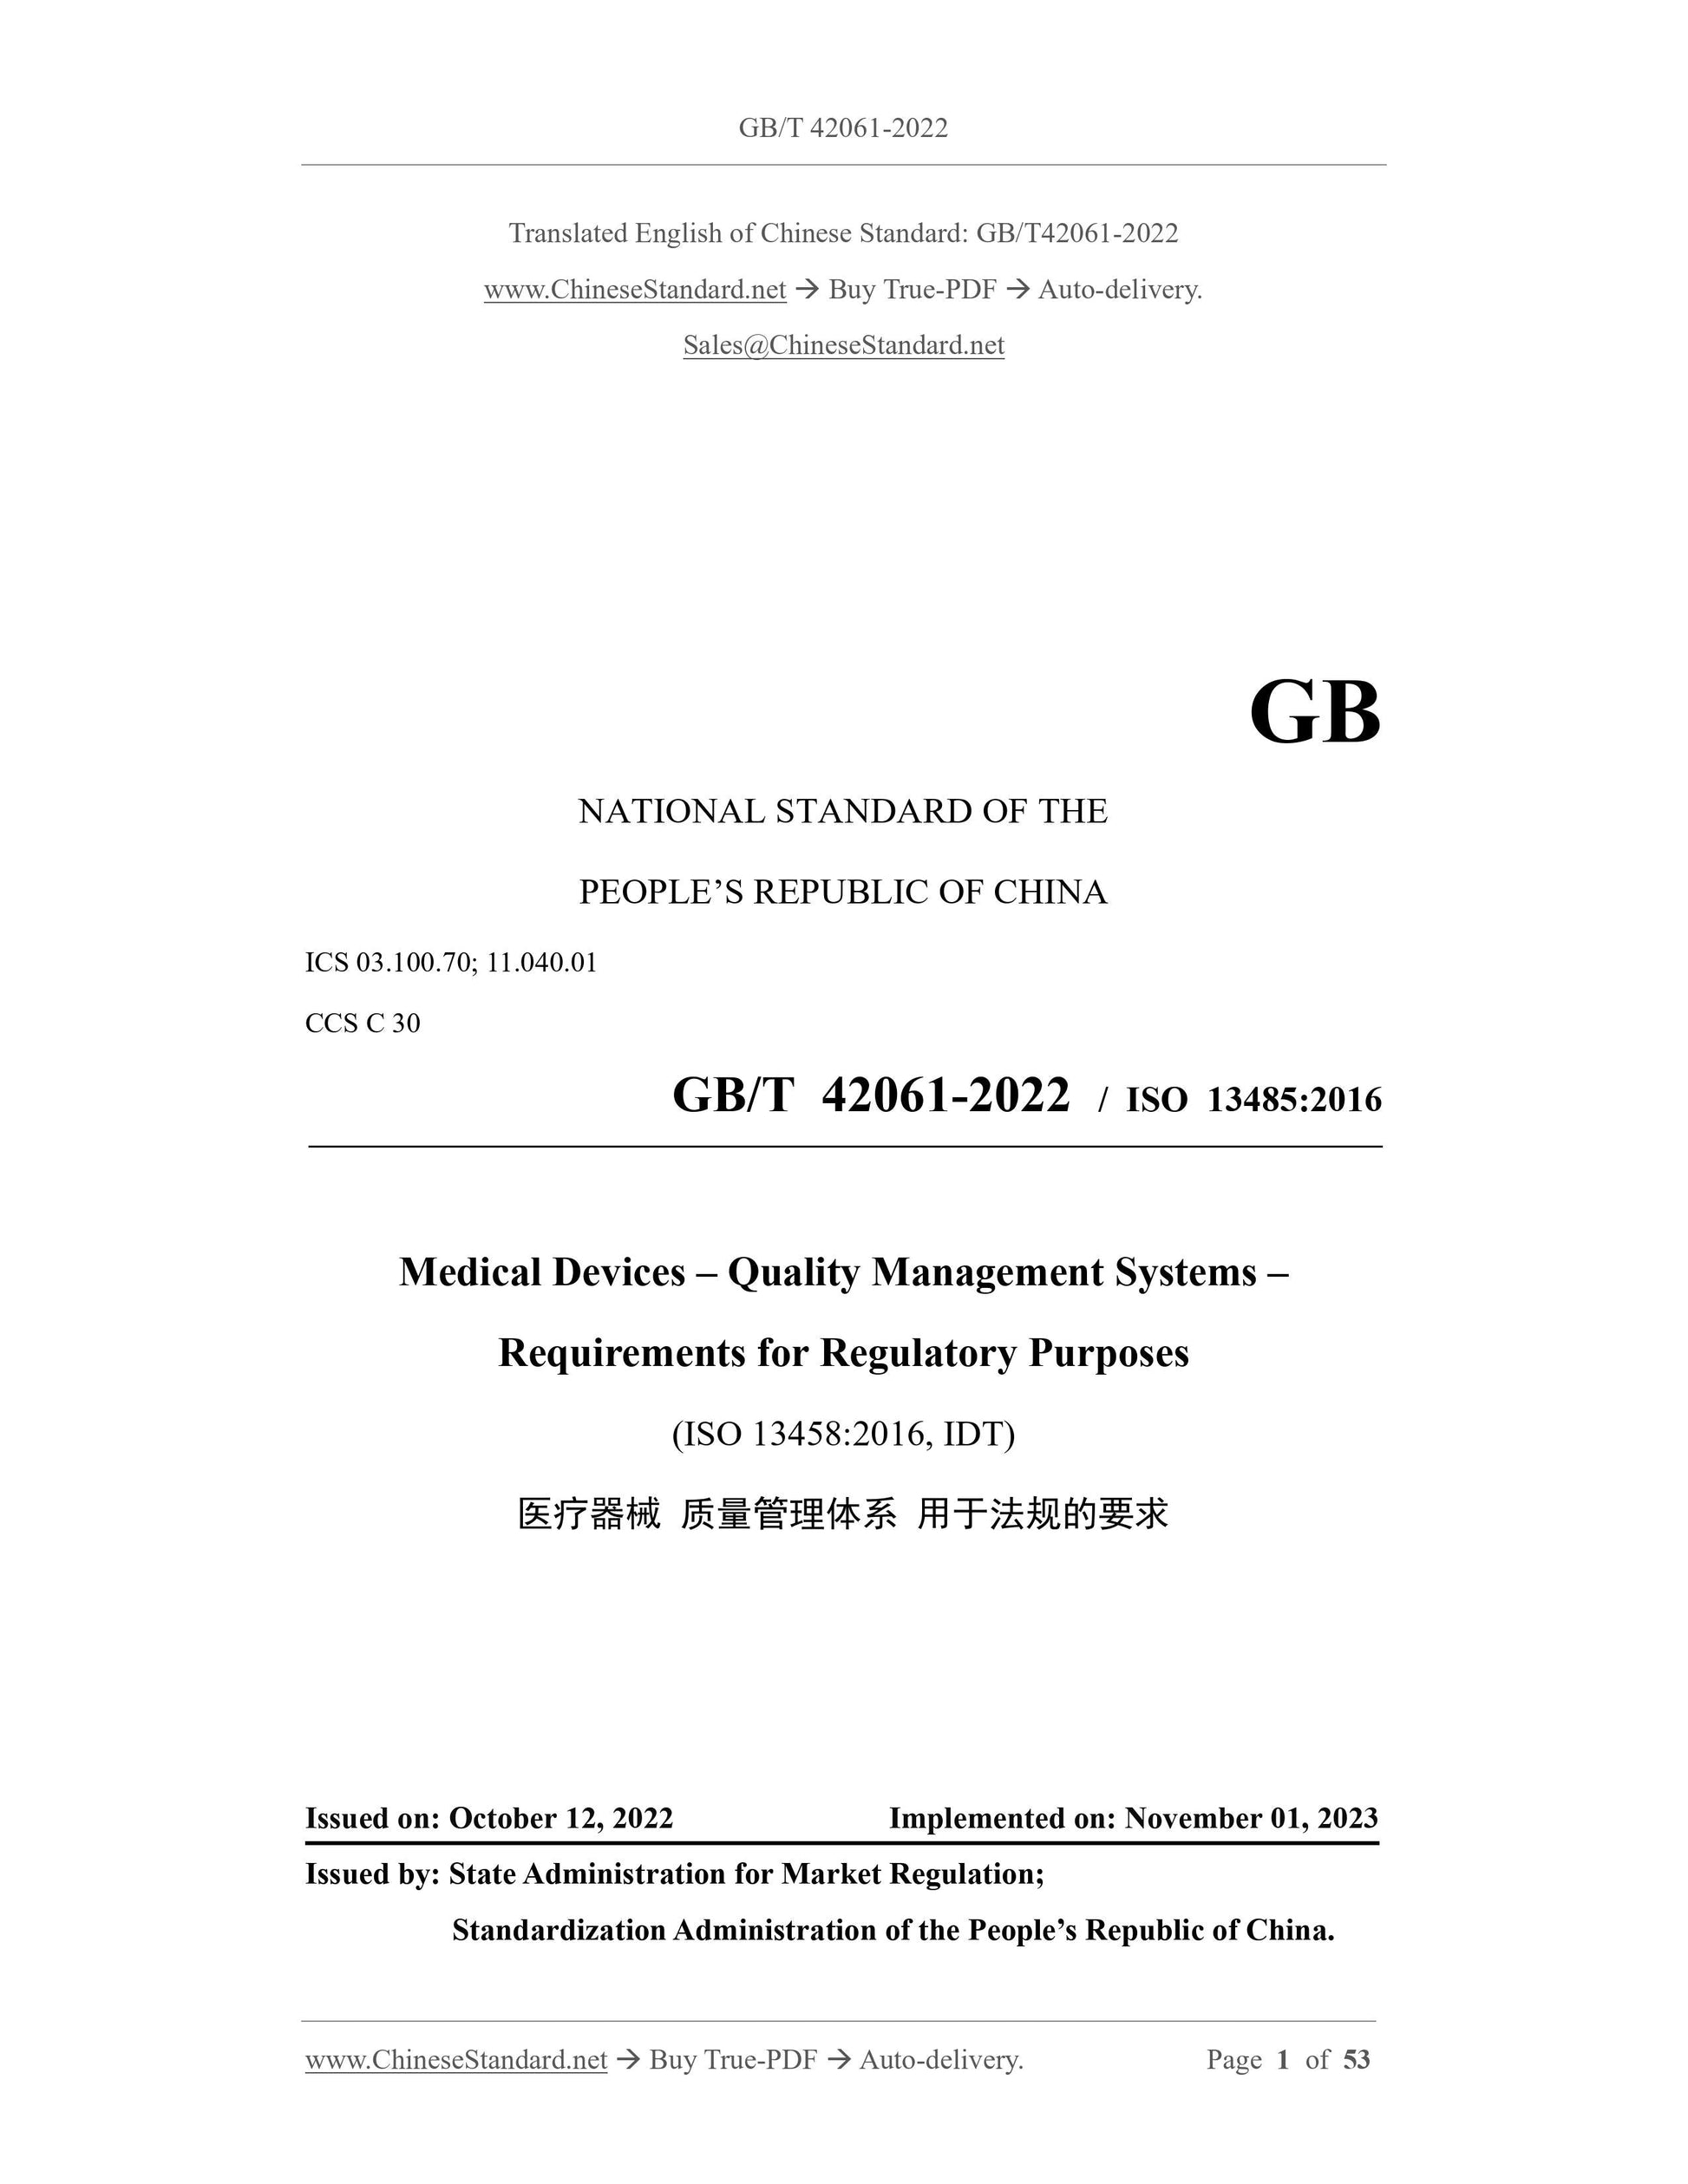 GB/T 42061-2022 Page 1